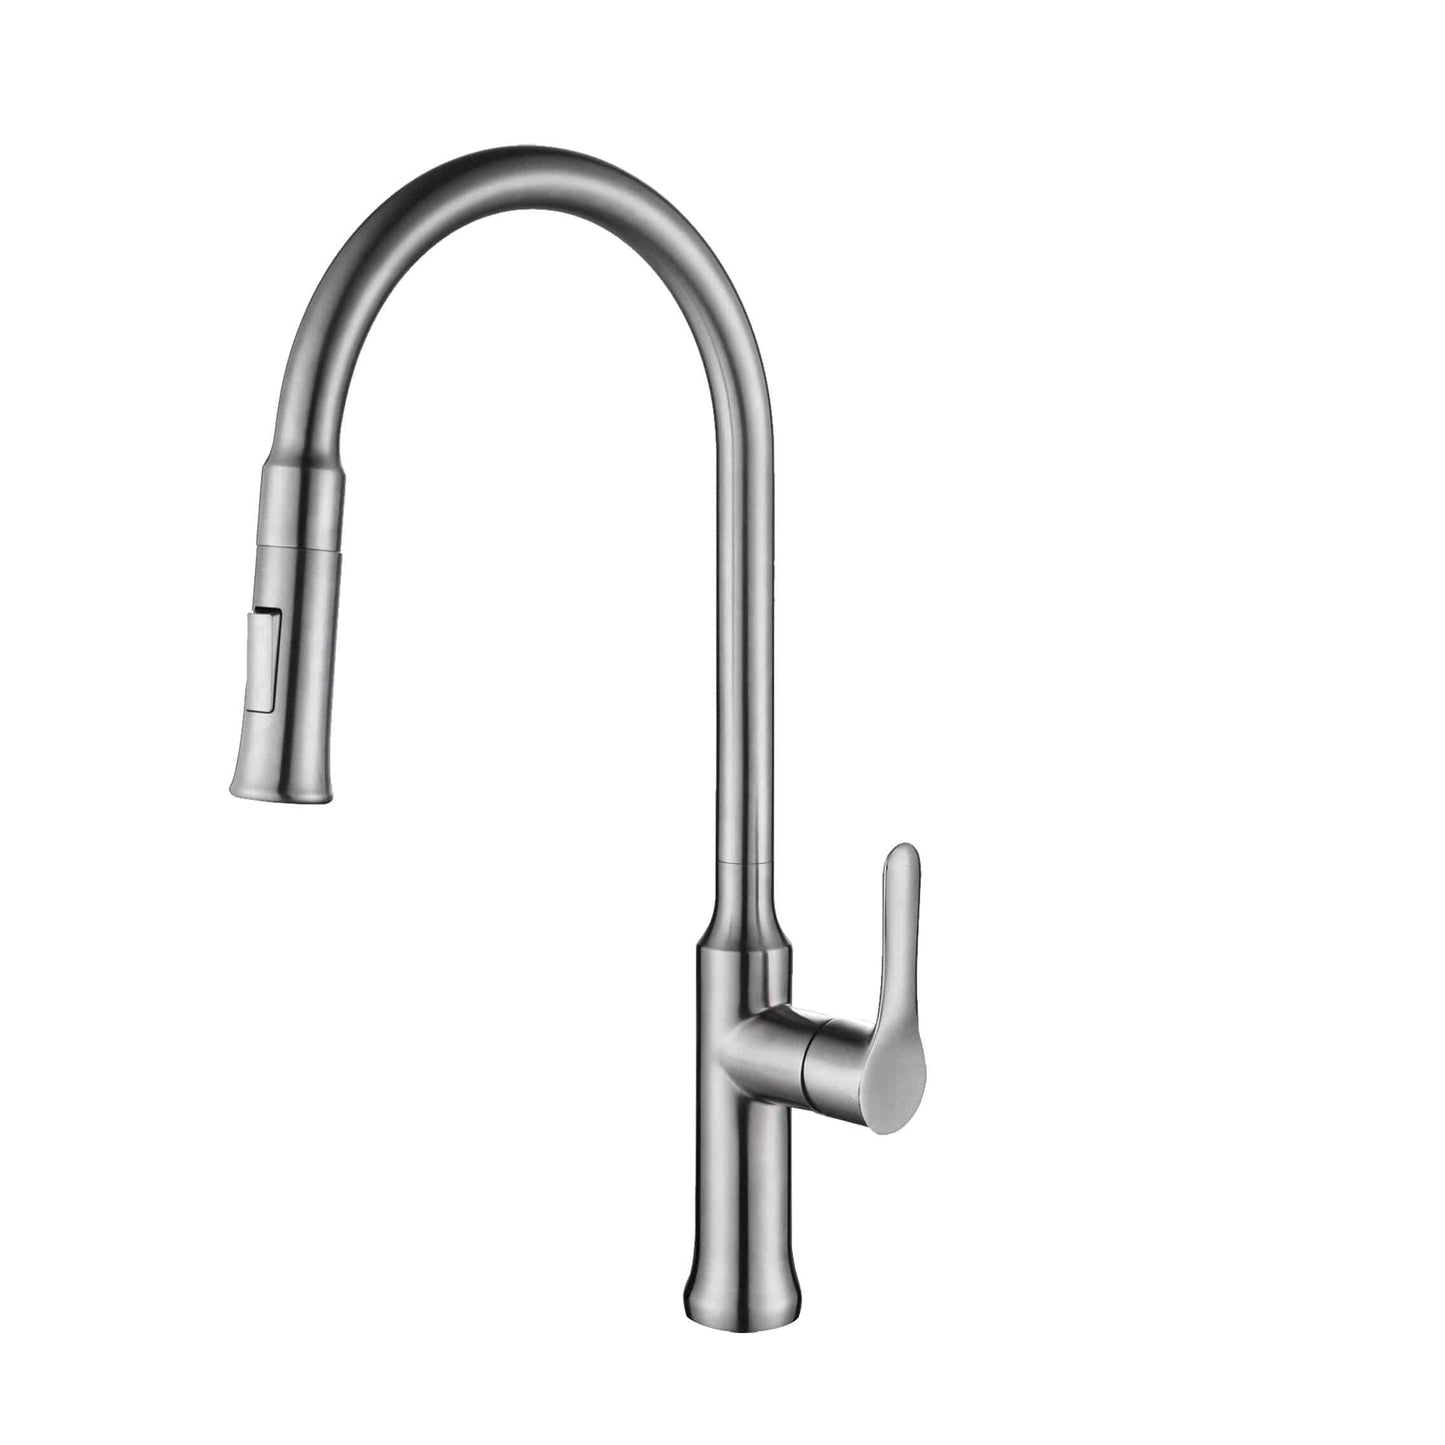 Stylish Forli 18.5" Kitchen Faucet Single Handle Pull Down Dual Mode Stainless Steel Brushed Finish K-137S - Renoz